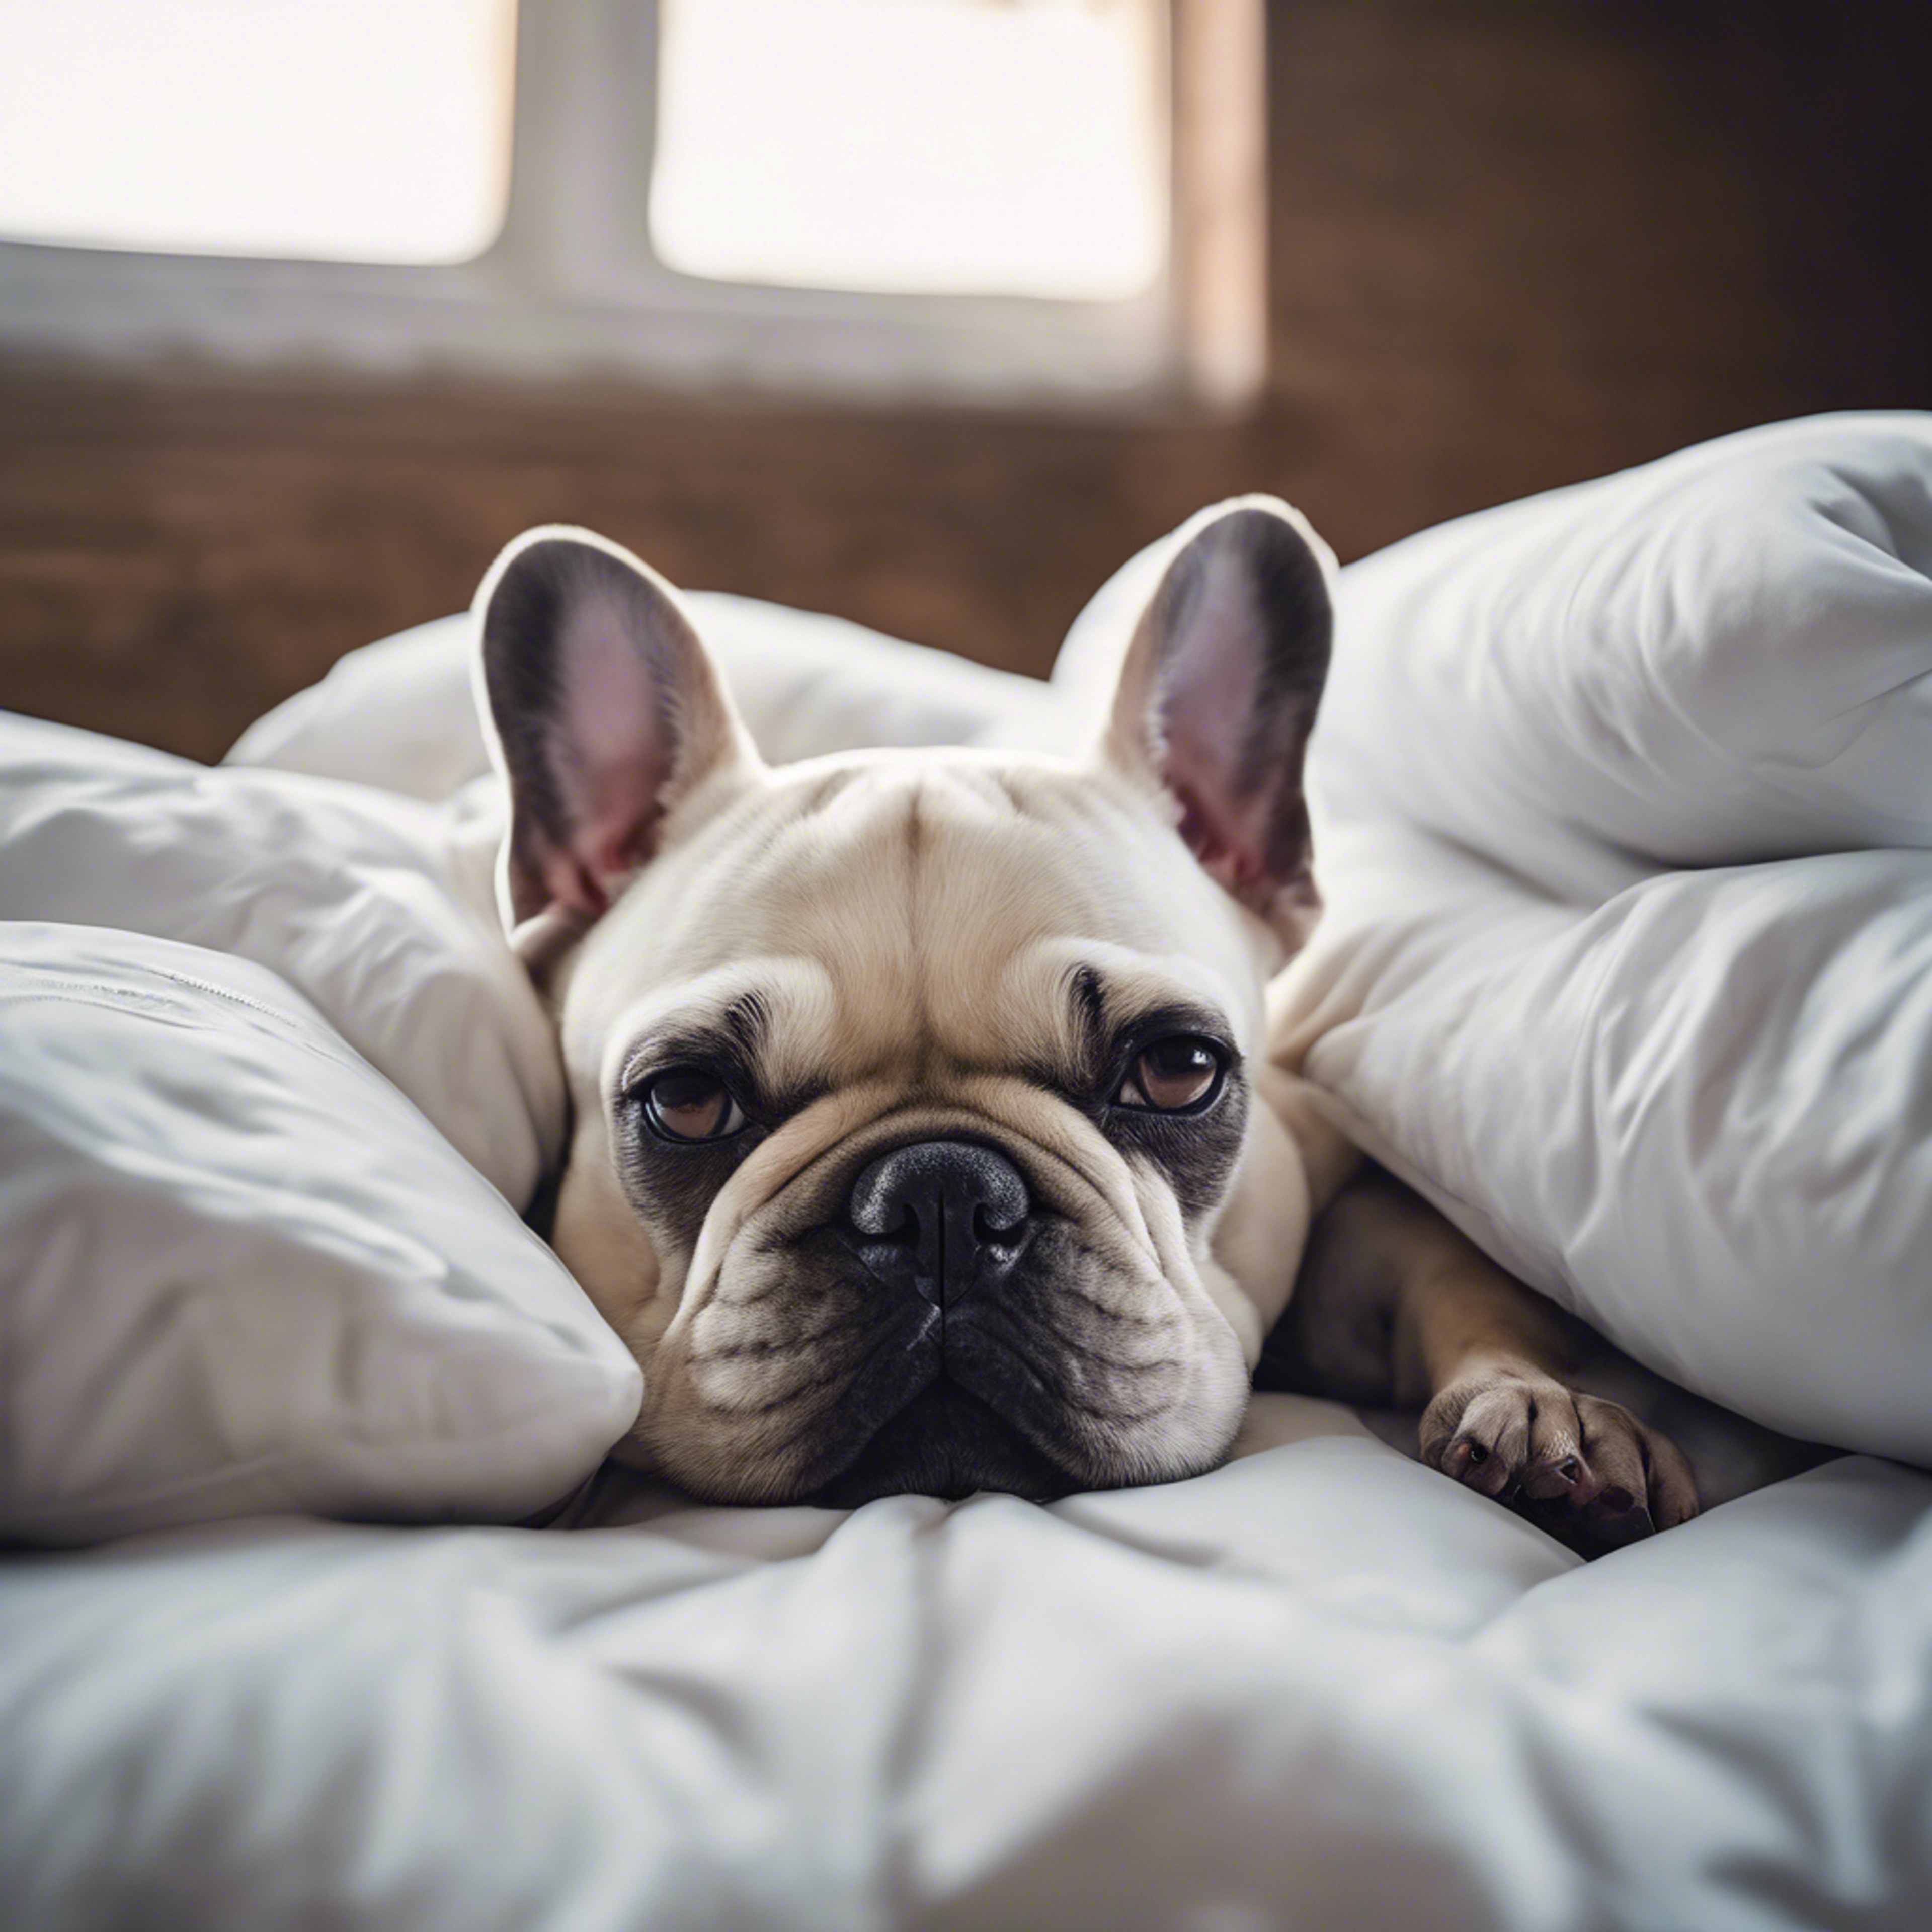 A young French Bulldog falling into a deep sleep, nestled into a pile of comfy pillows on a king-size bed.壁紙[35e5ea00e17d41afbf2f]